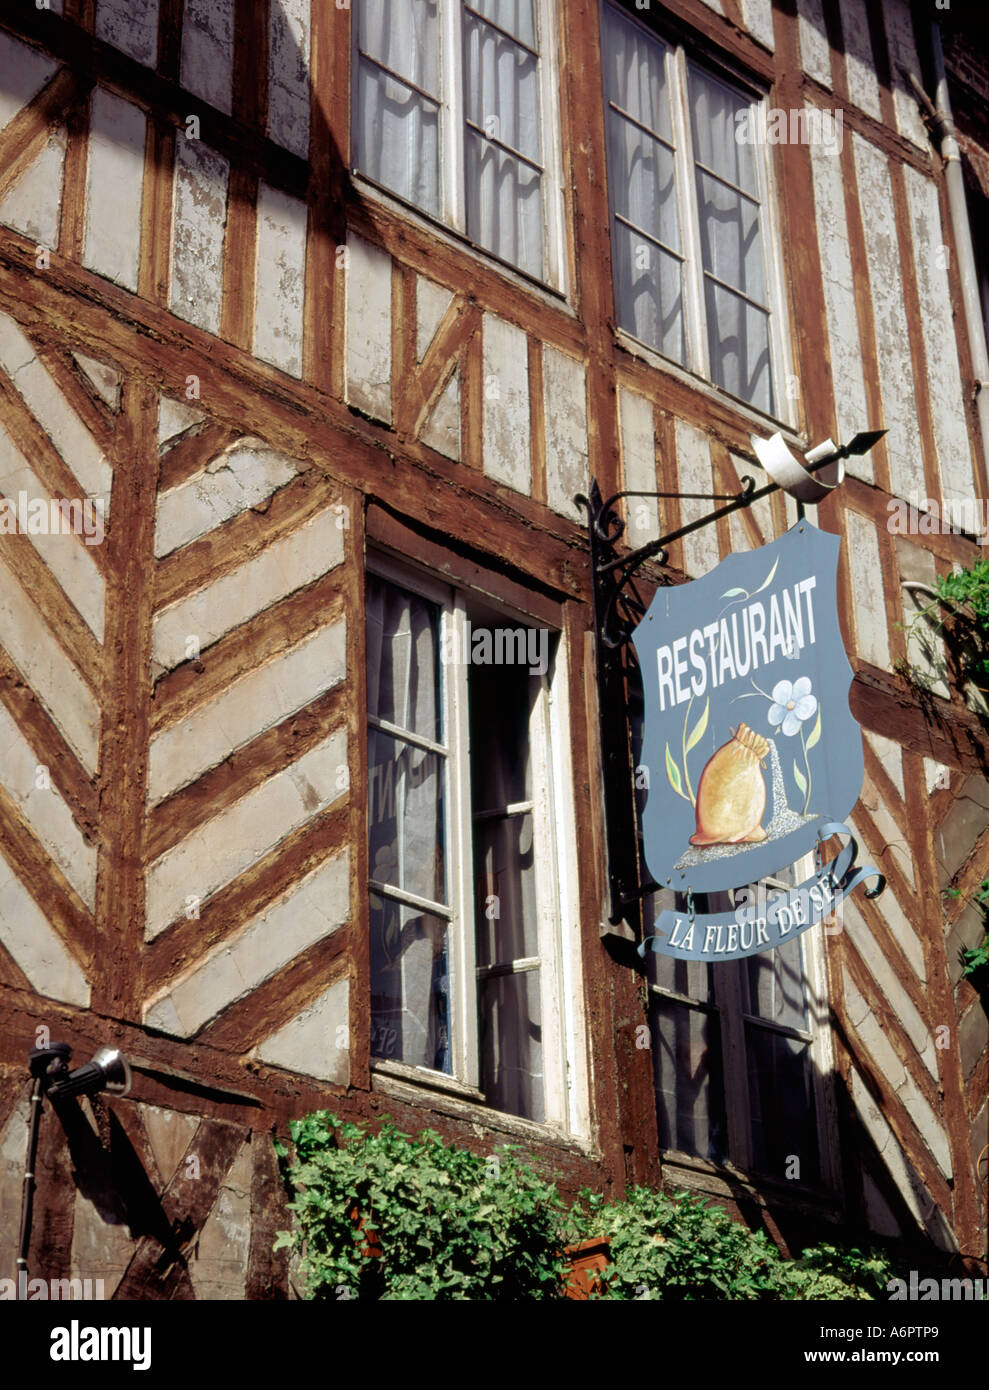 Restaurant sign in Honfleur, Normandy, France Stock Photo